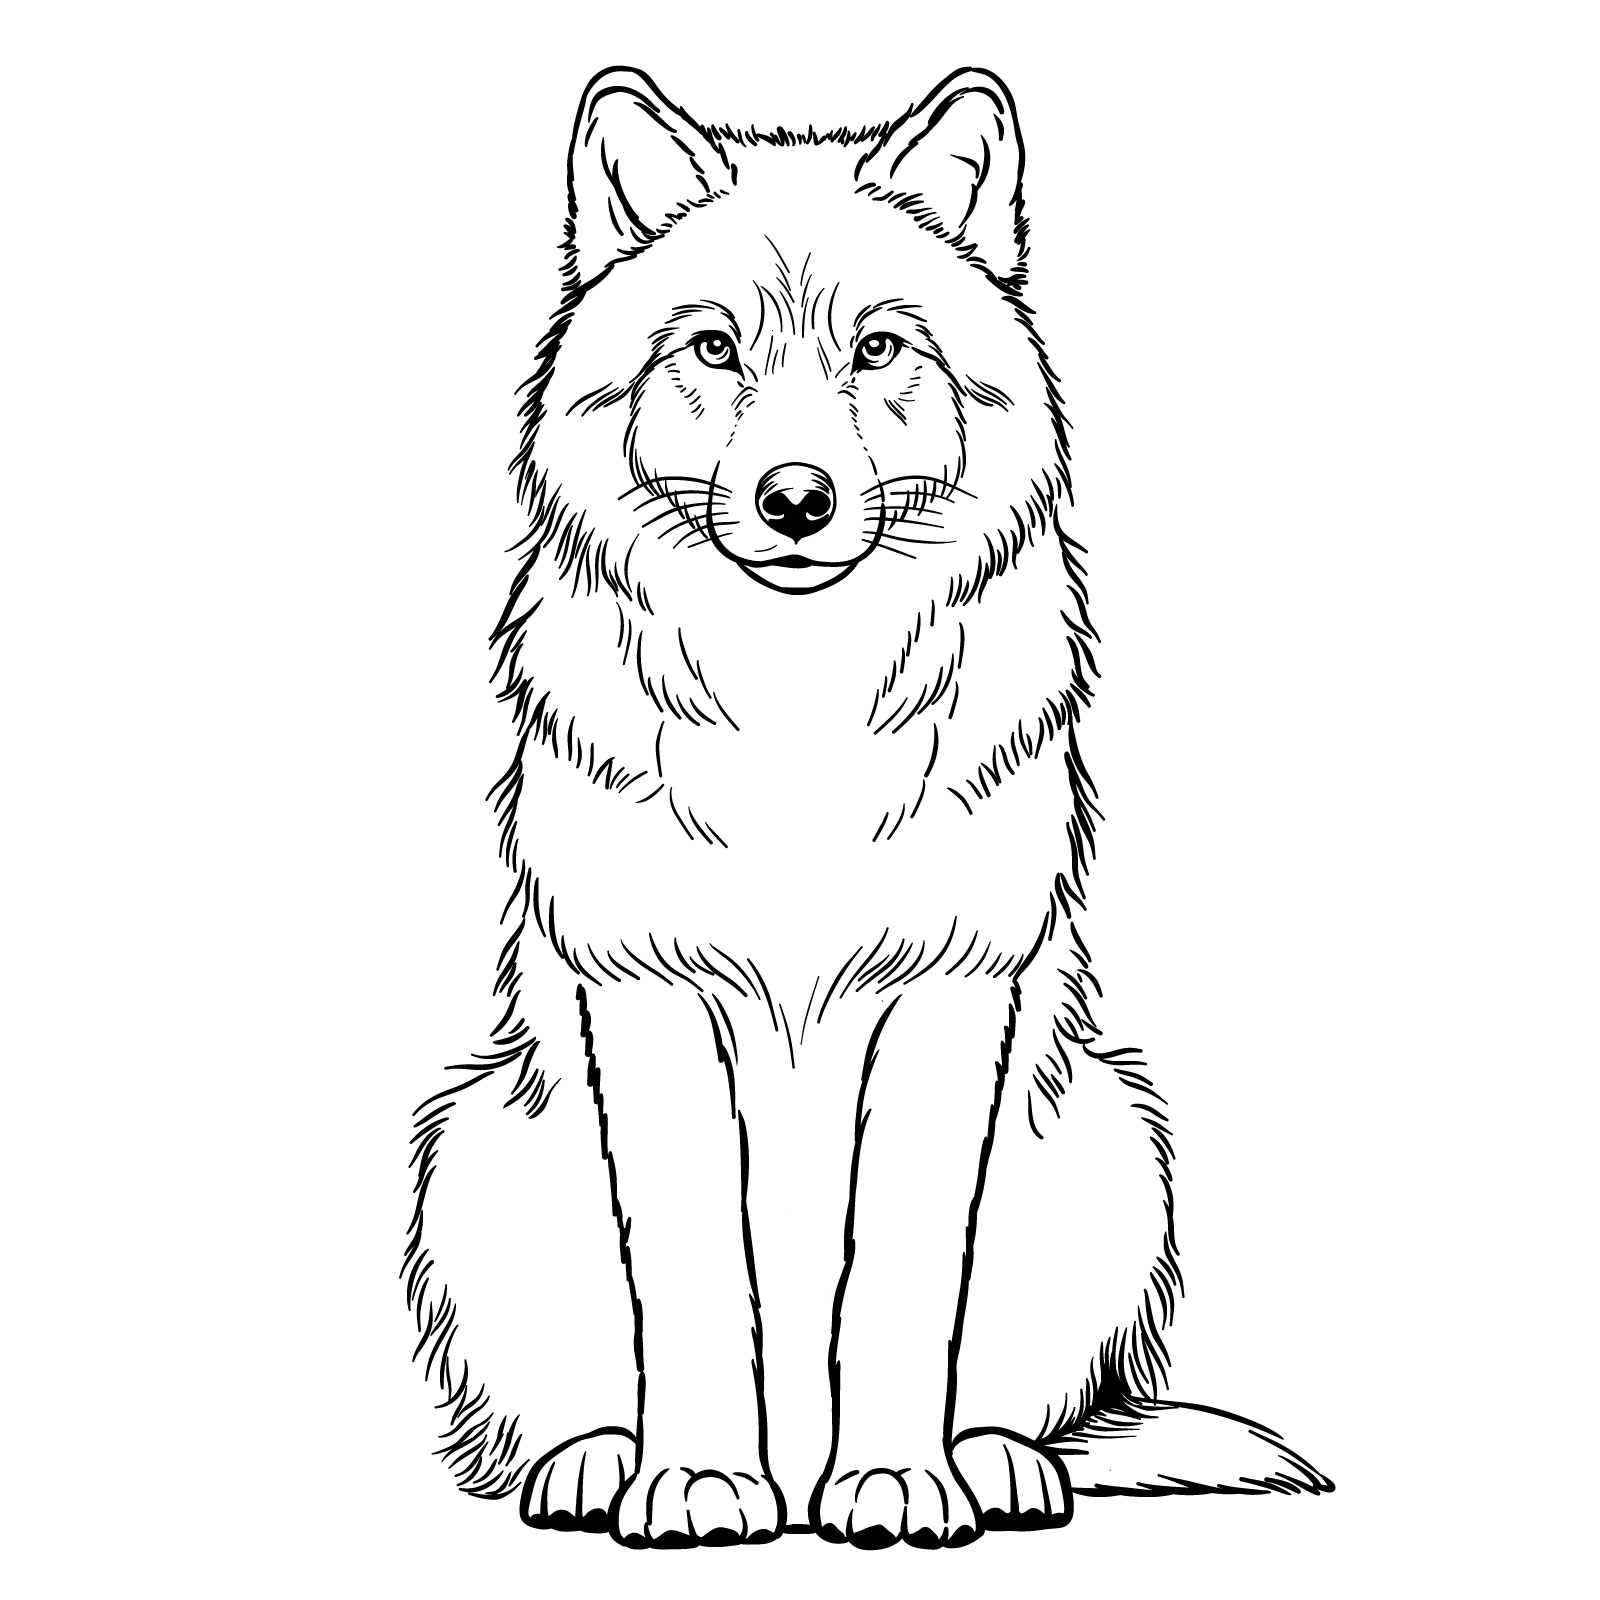 Finalized sitting wolf drawing with erased base sketches - step 16